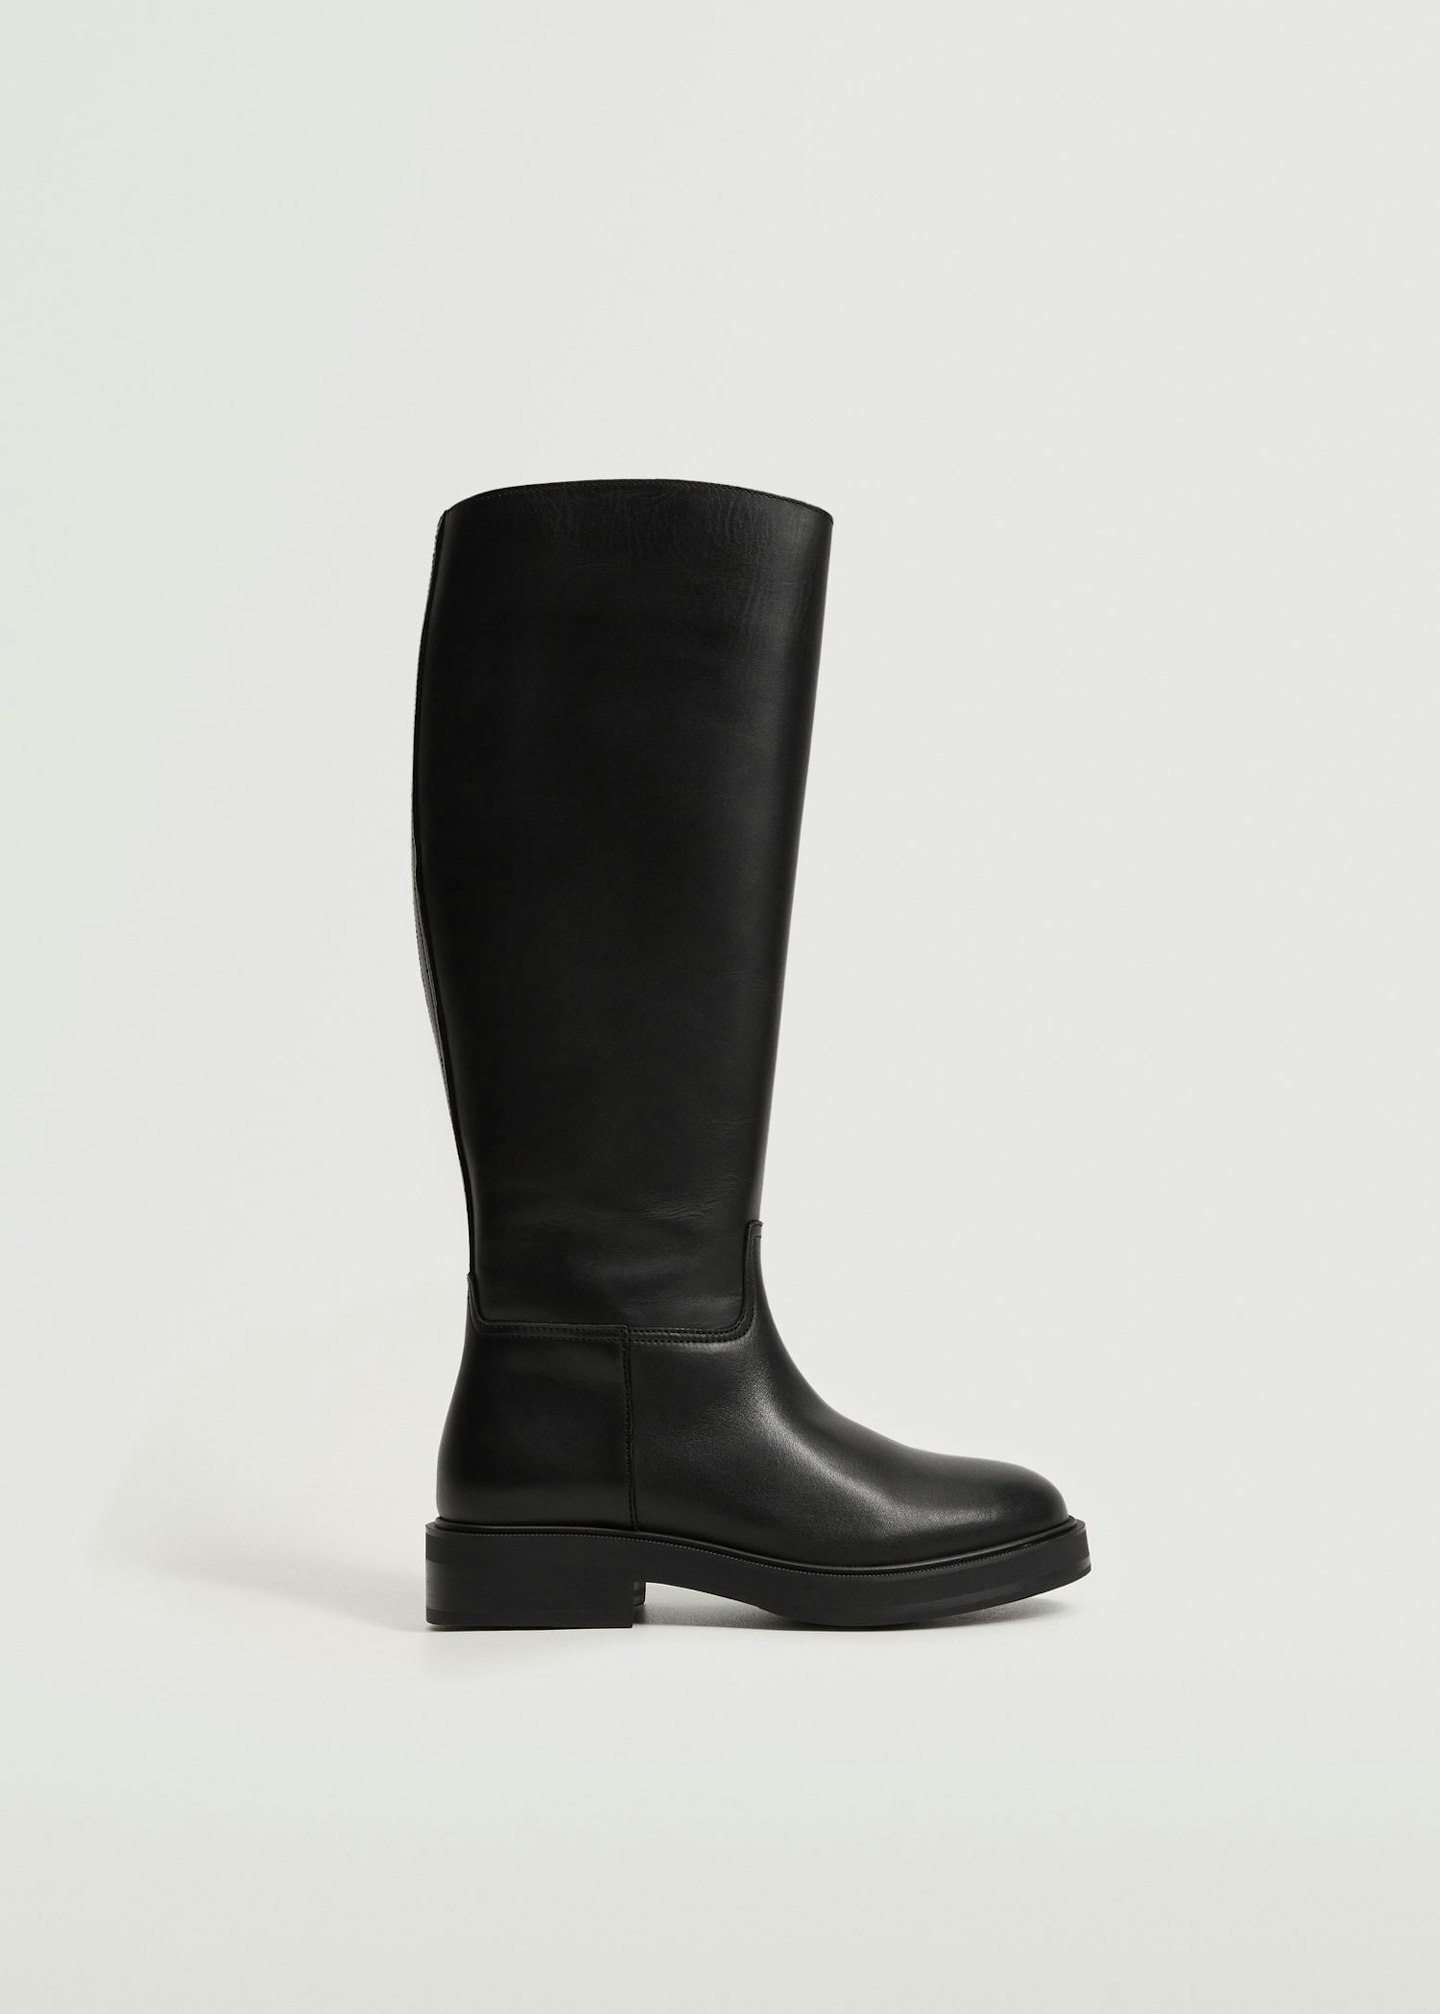 Mango, Leather Boots With Tall Leg, £139.99